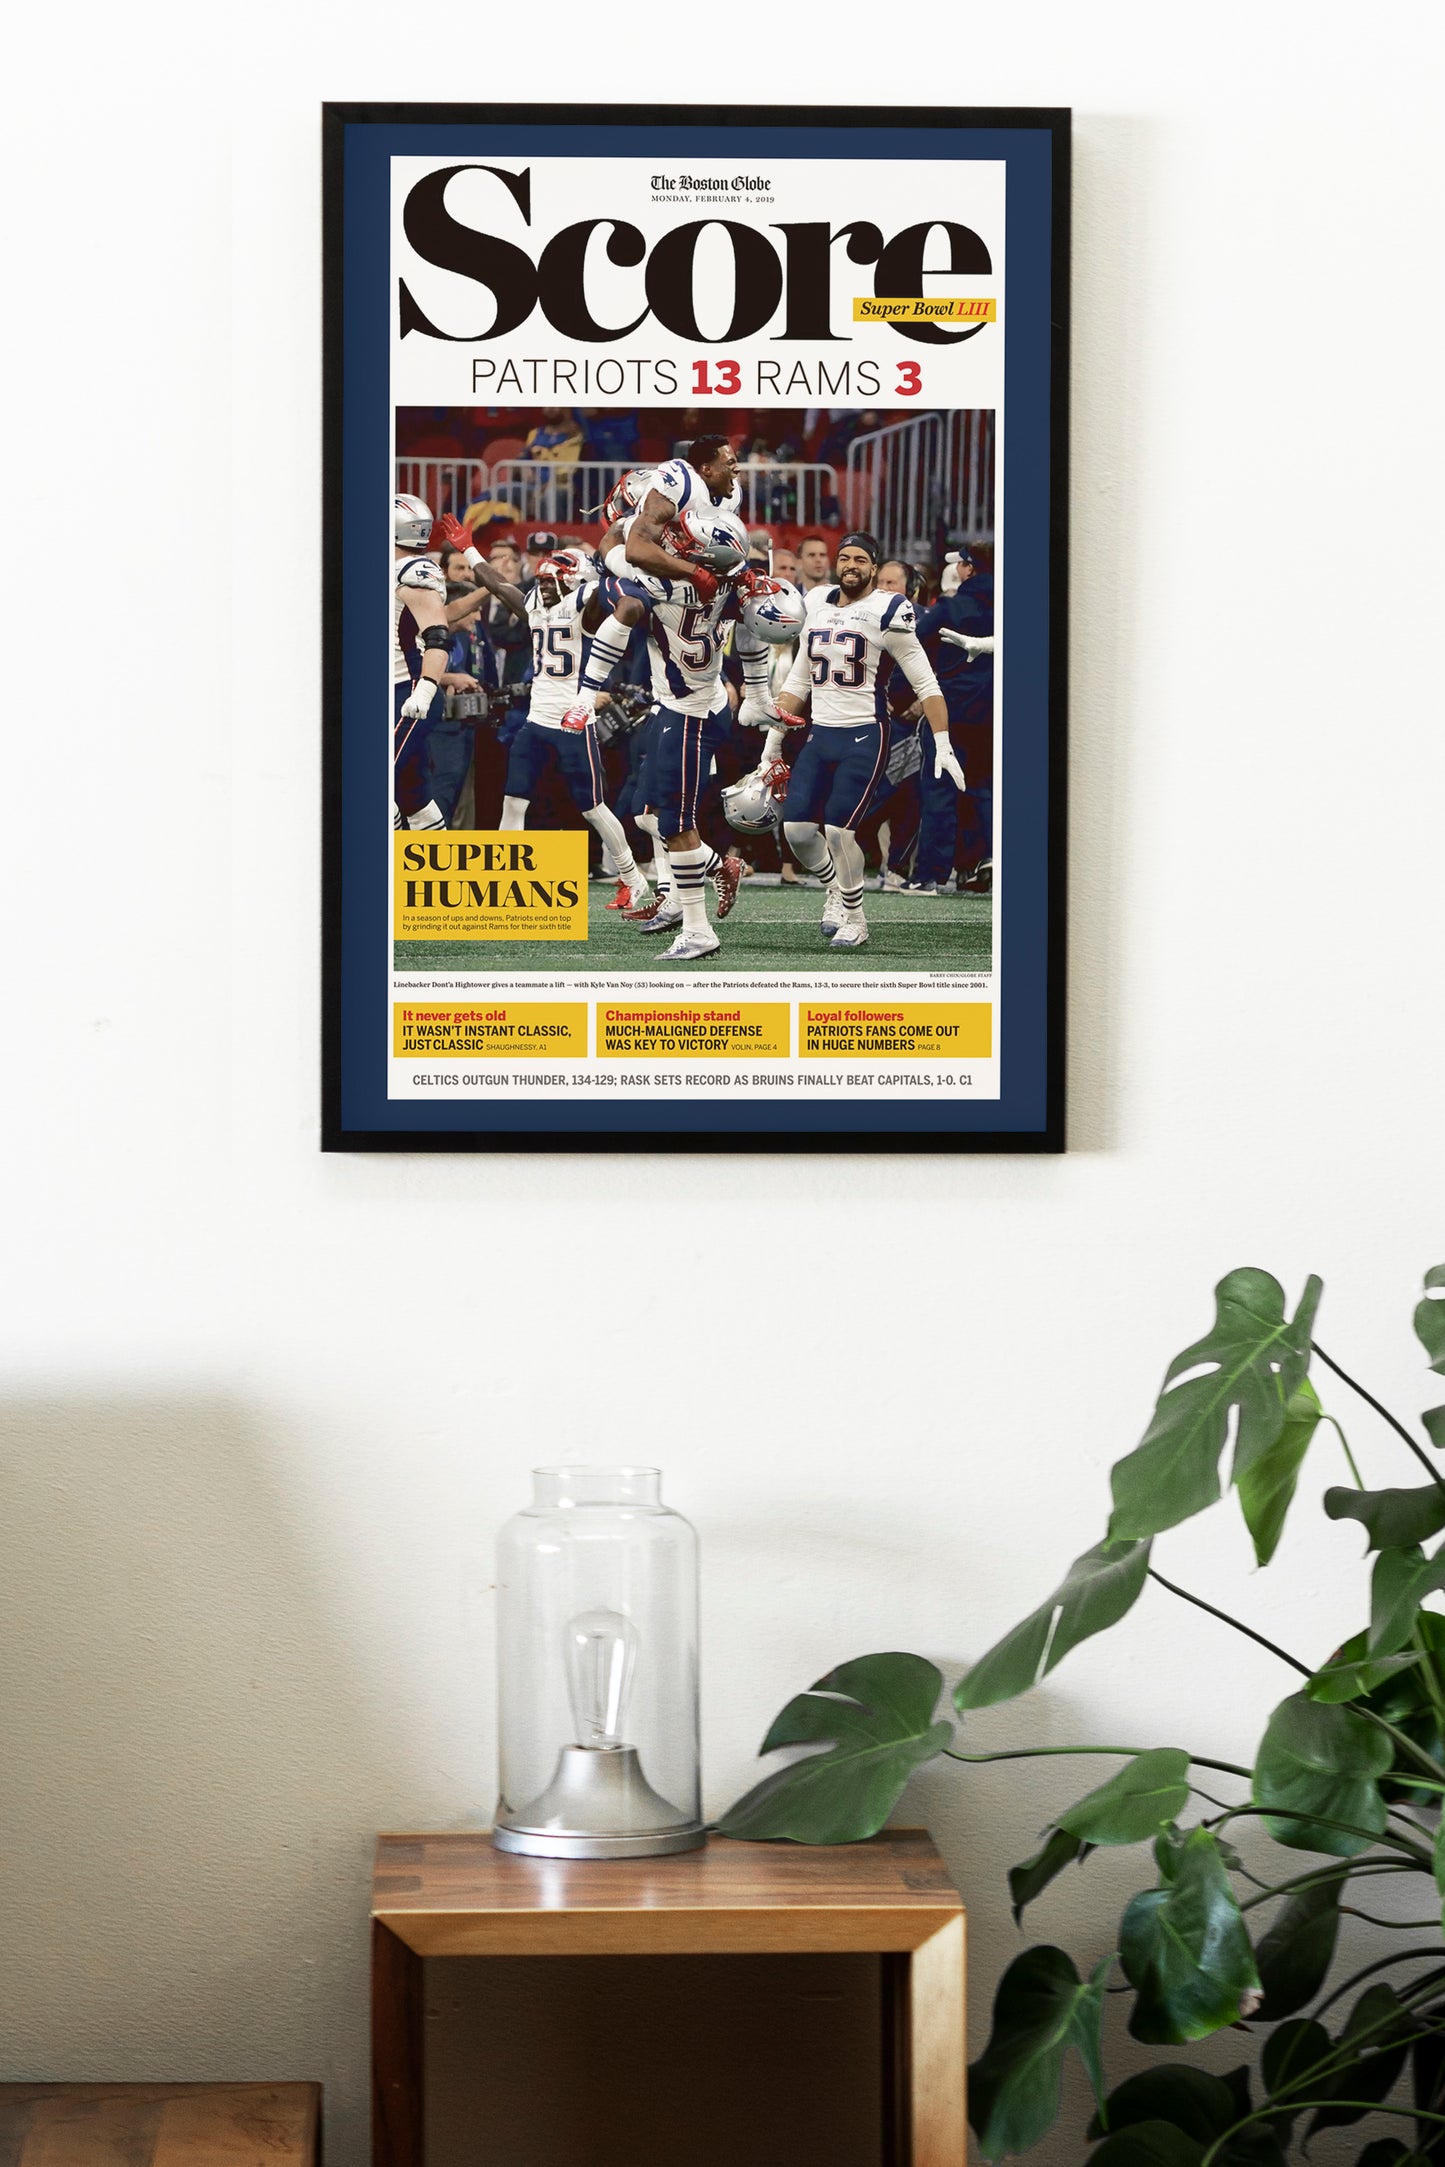 New England Patriots 2019 Super Bowl NFL Champions Front Cover The Boston Globe Newspaper Poster